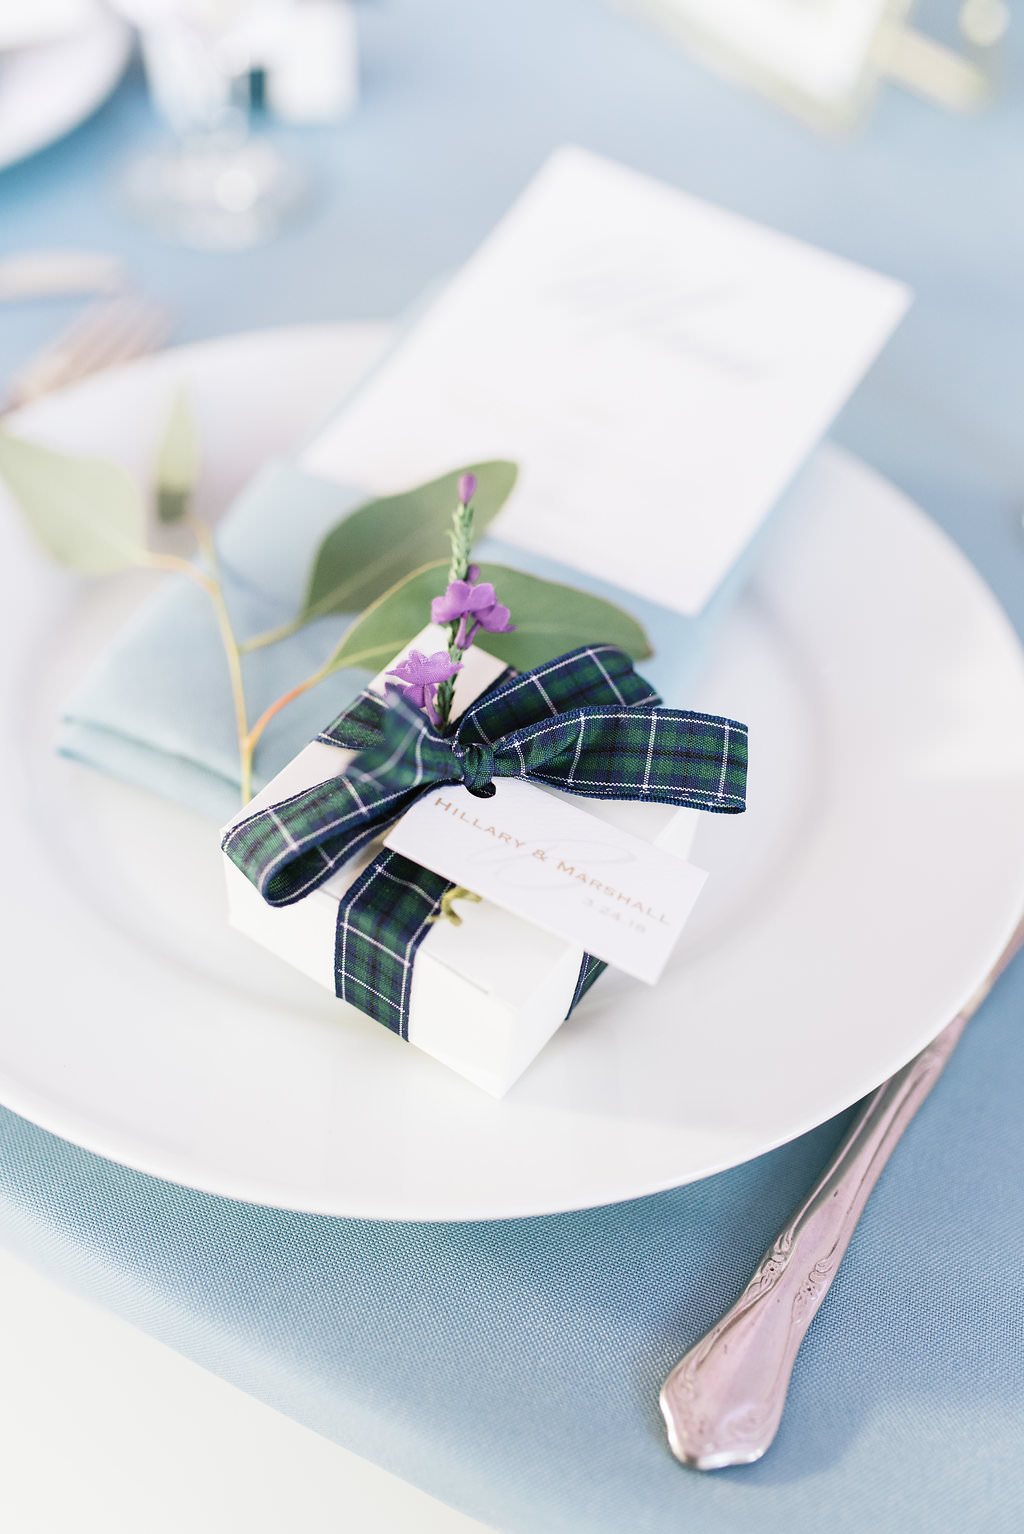 Elegant Classic Wedding Reception Decor, Dusty Blue Tablecloths, Small White Giftbox Tied with Blue and Green Plaid Ribbon Wedding Favor